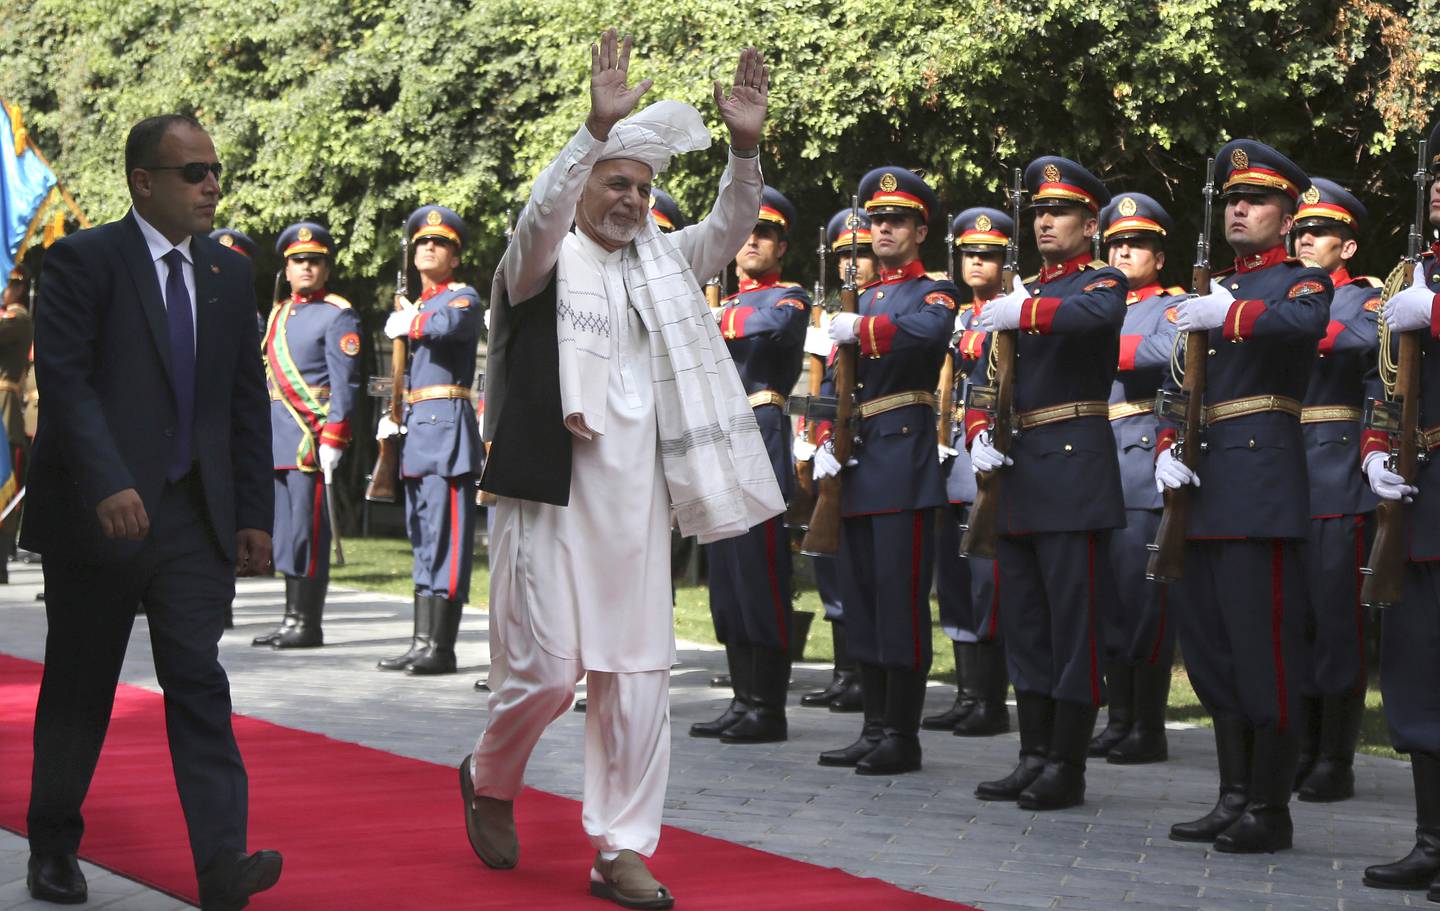 Afghanistan's President Ashraf Ghani, center, greets as he arrives to offer Eid al-Adha prayers at the presidential palace in Kabul, Afghanistan, Sunday, Aug. 11, 2019.